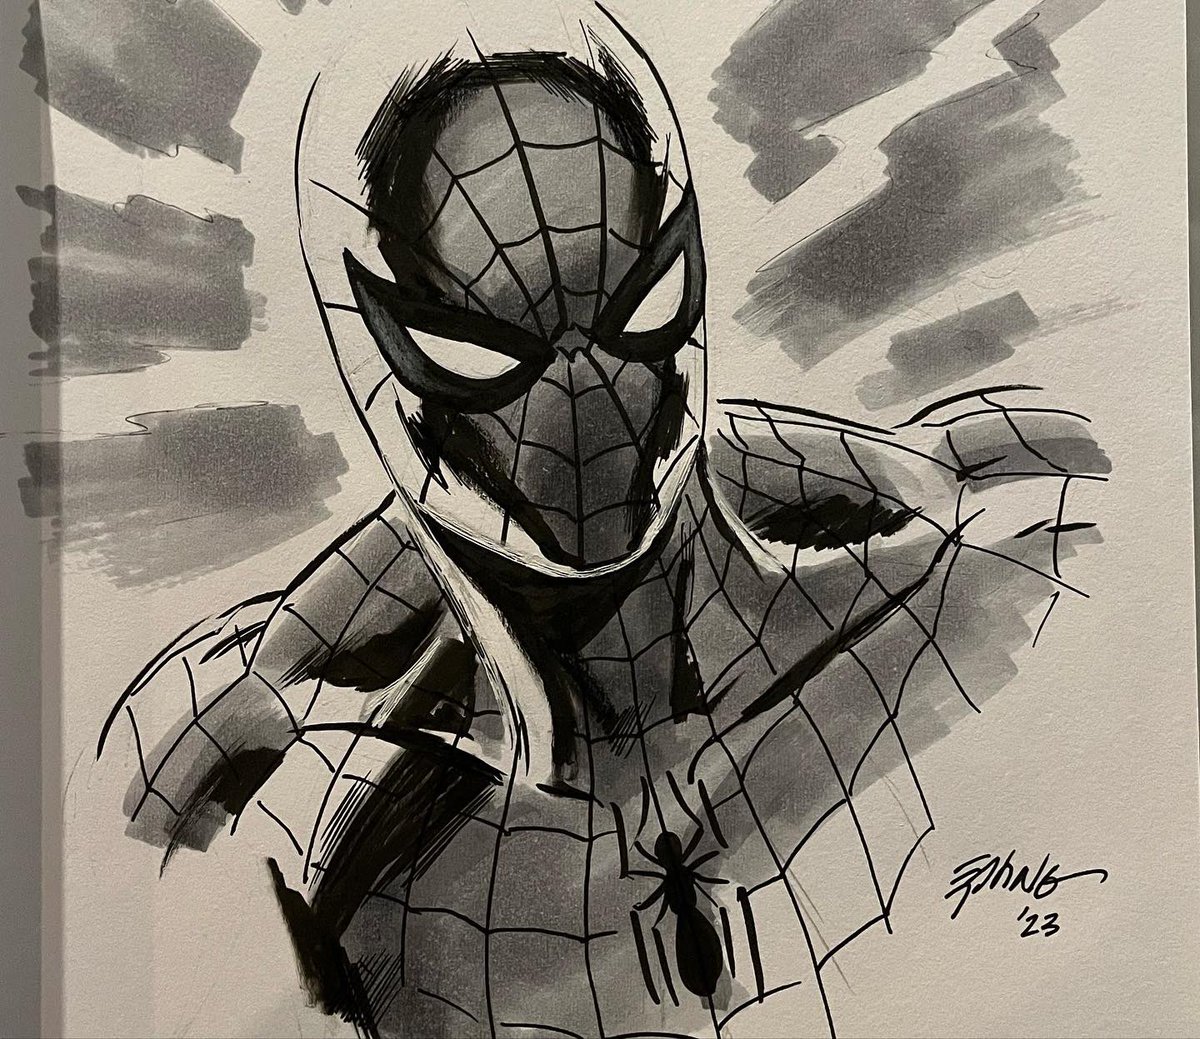 I was lucky enough to get a @SteveEpting sketch in my Spider-Man sketchbook this year at #HeroesCon. A great drawing by a great artist.